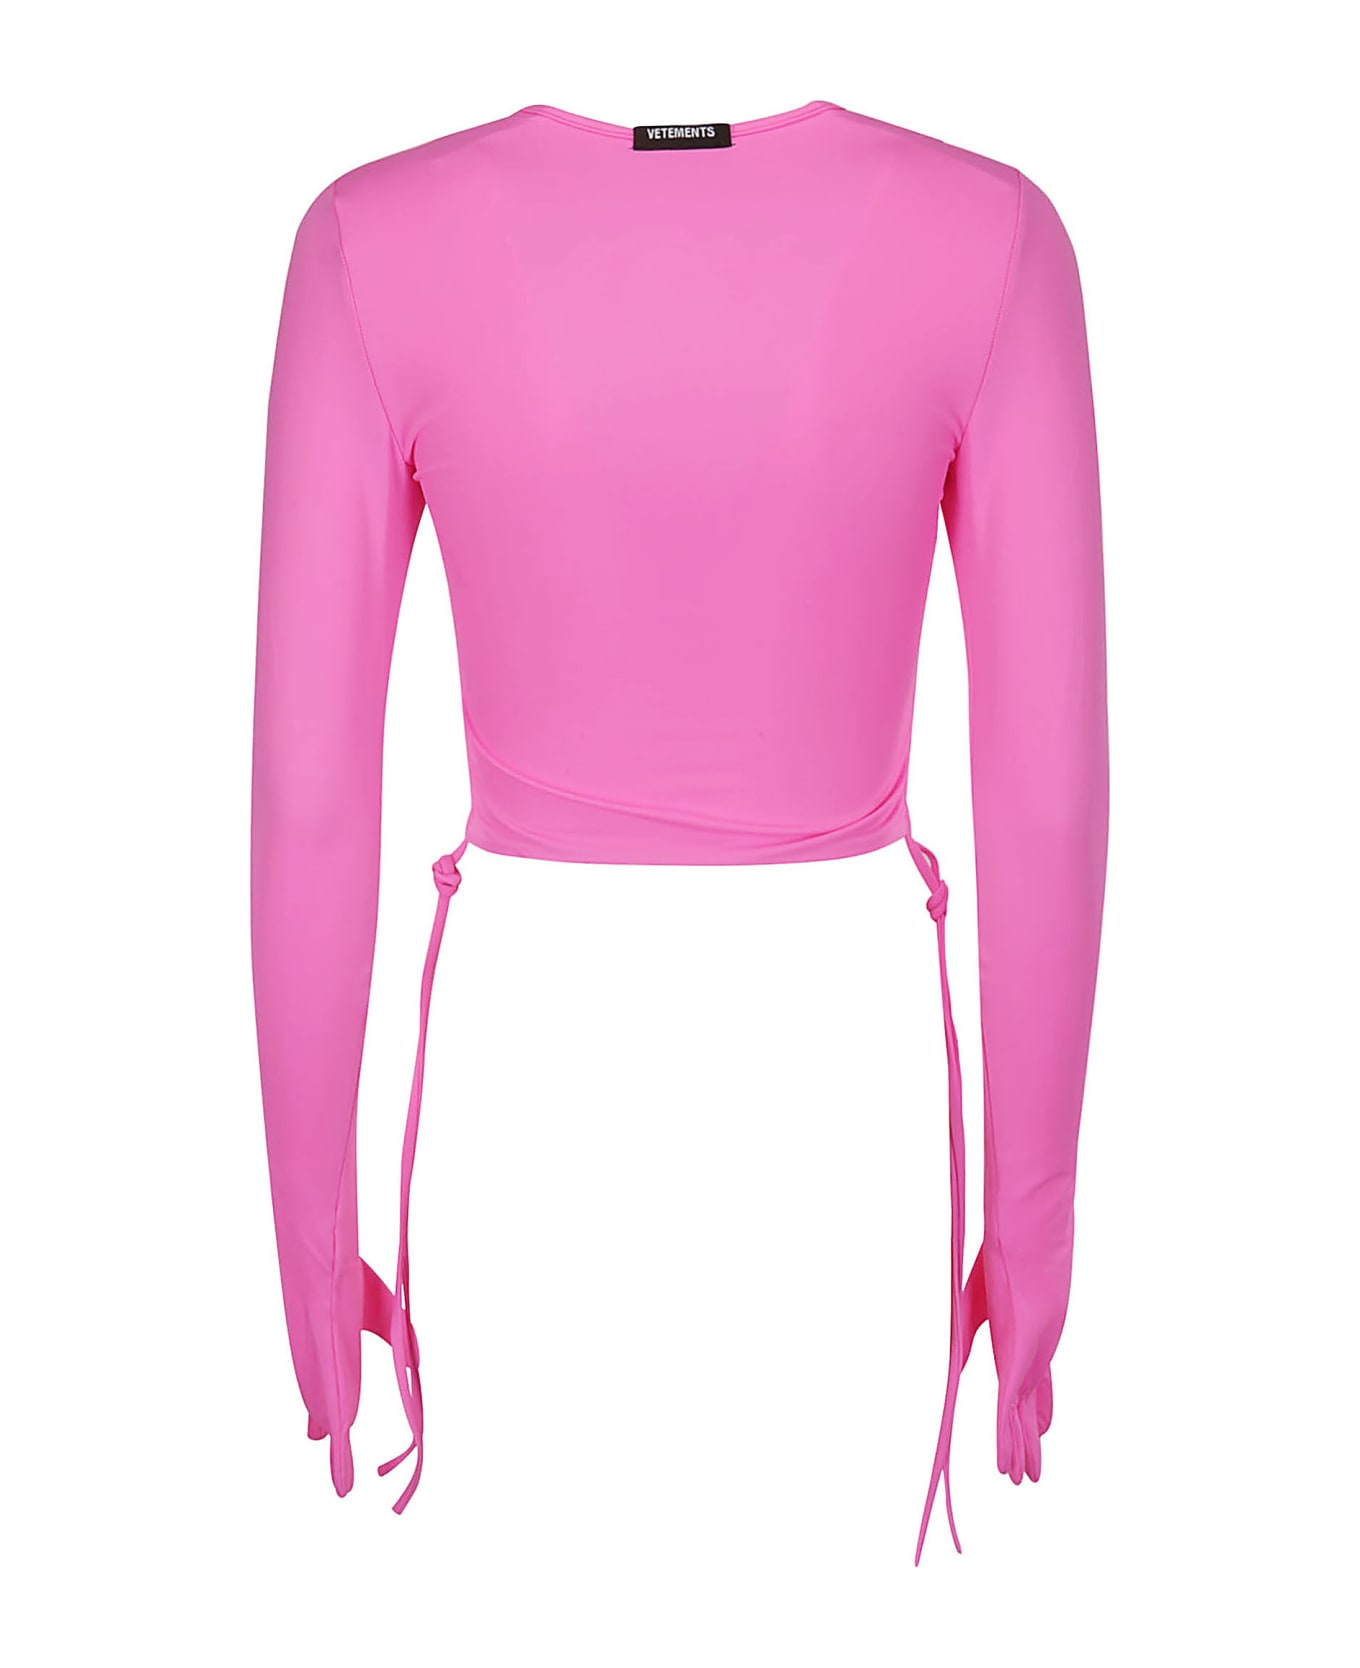 VETEMENTS Cropped Styling Top - HOT PINK